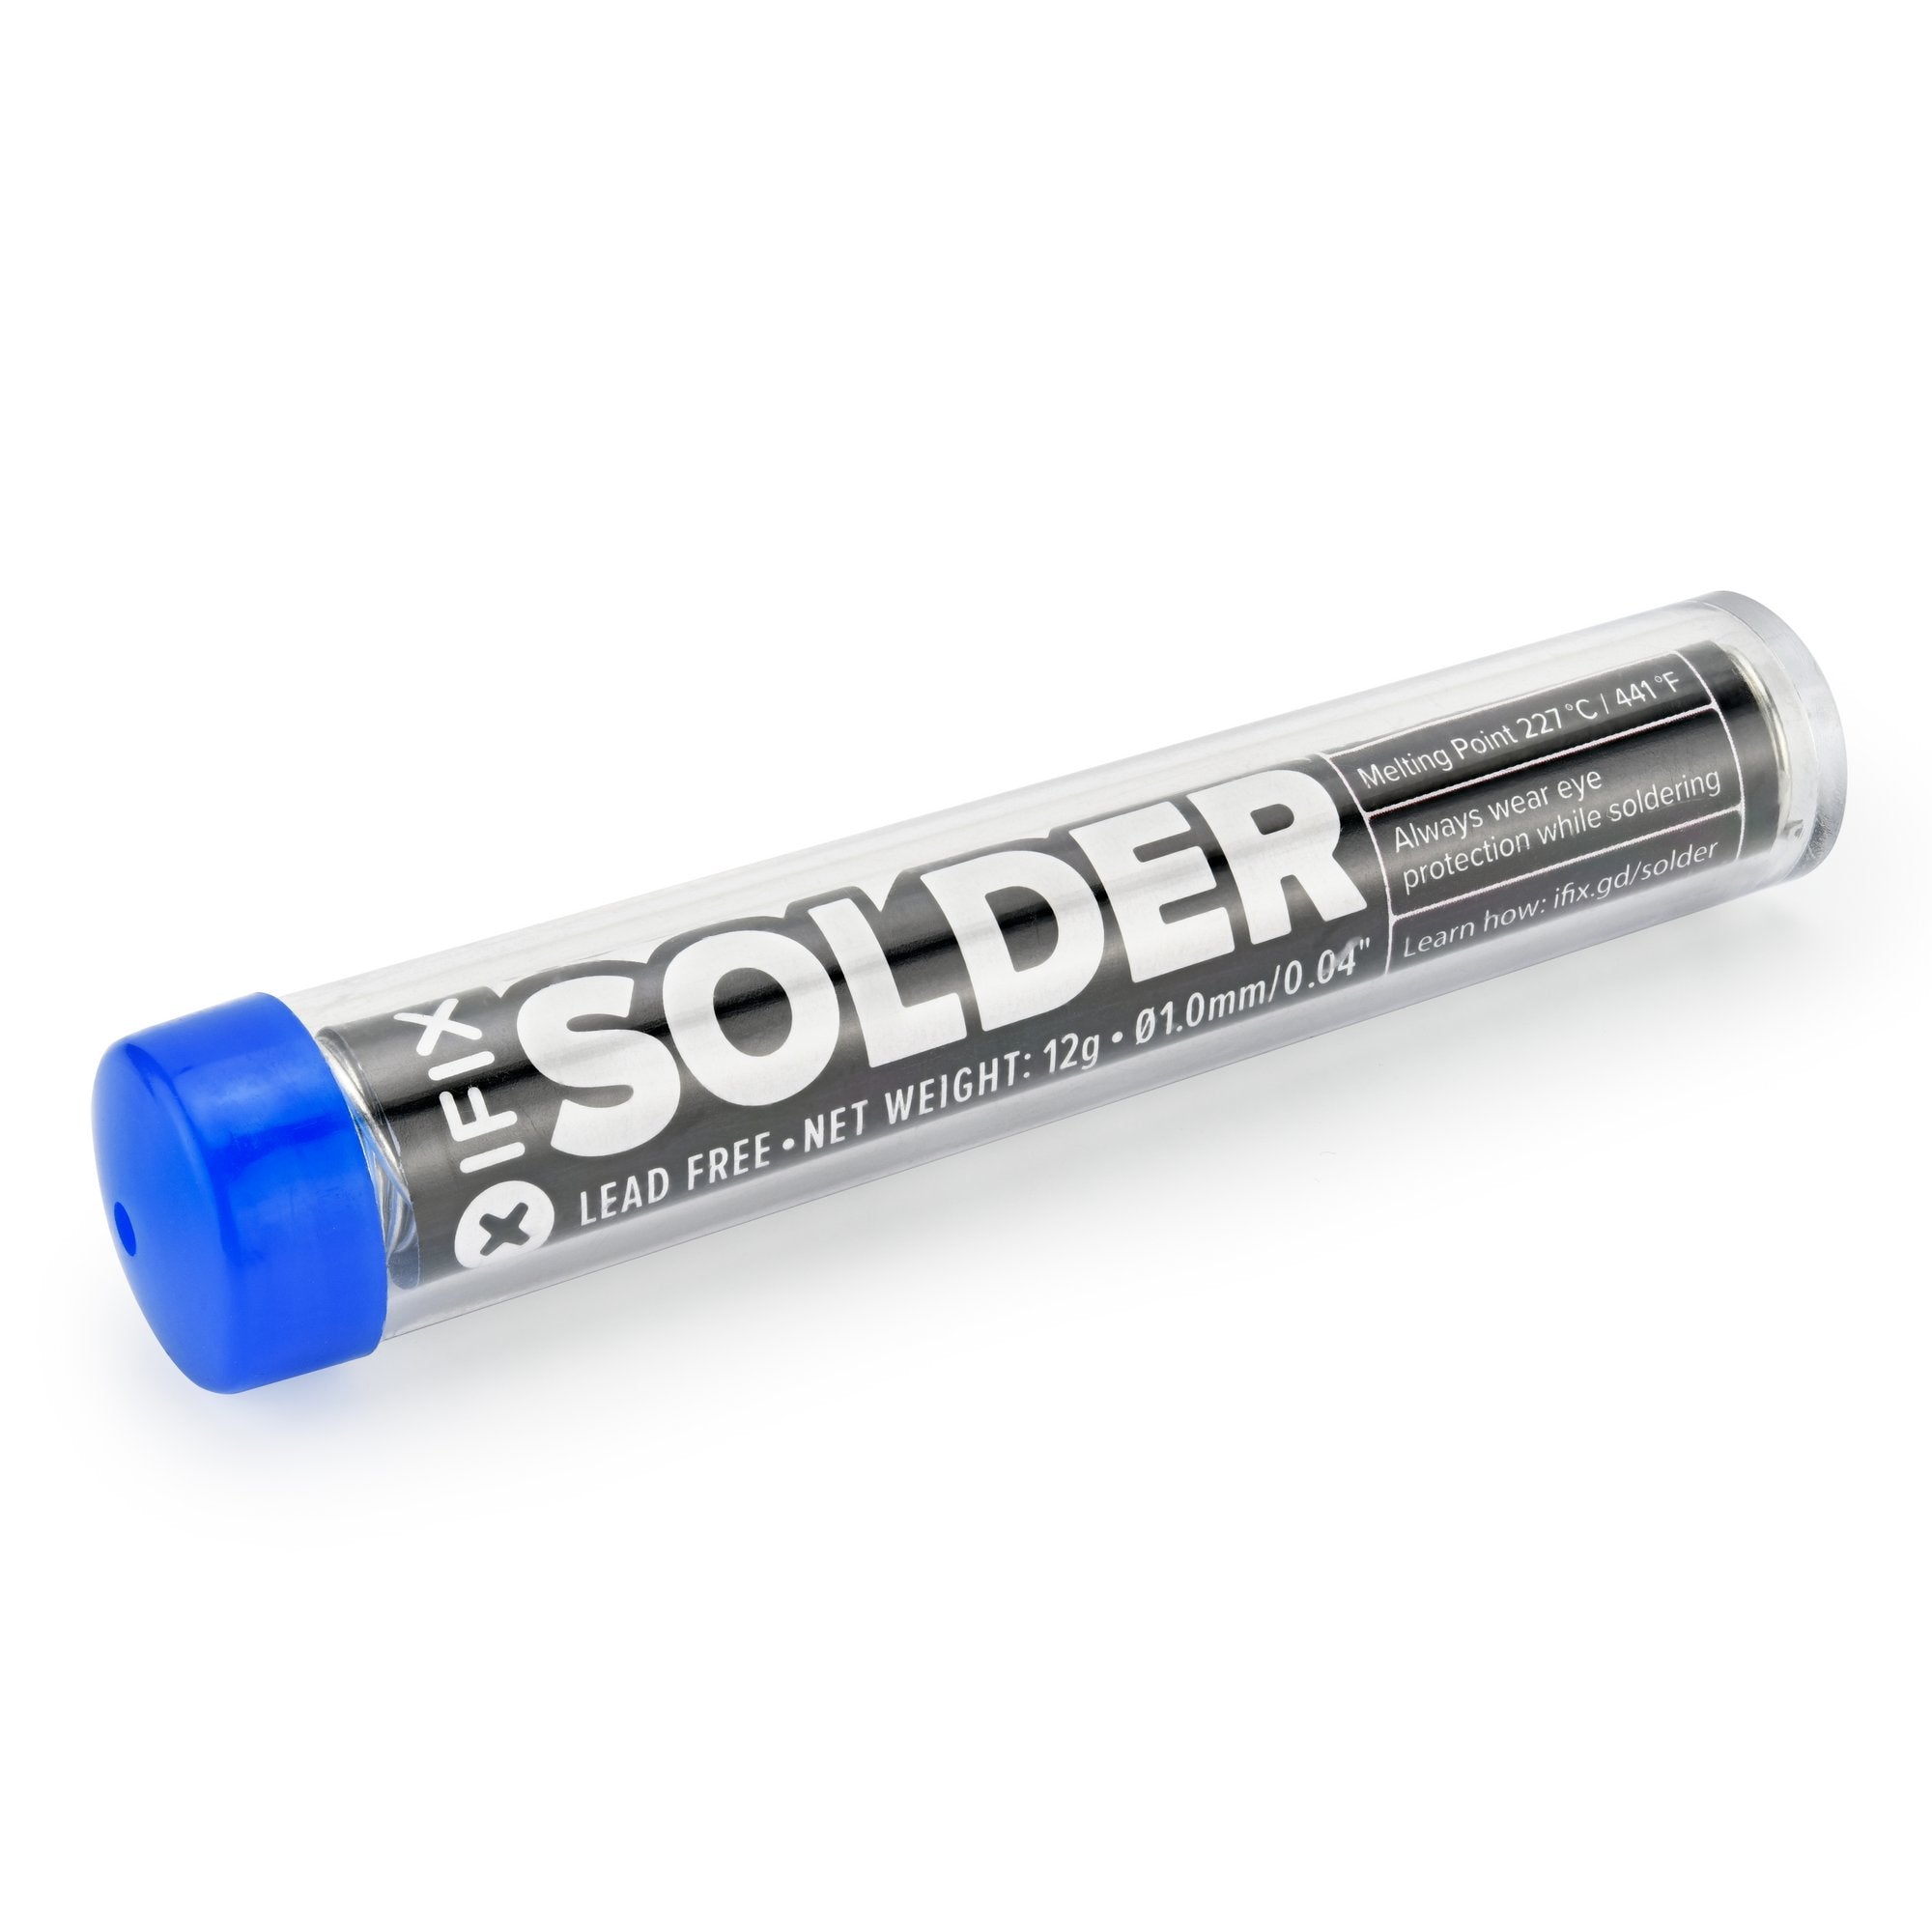 Lead-Free Solder New iFixit Brand